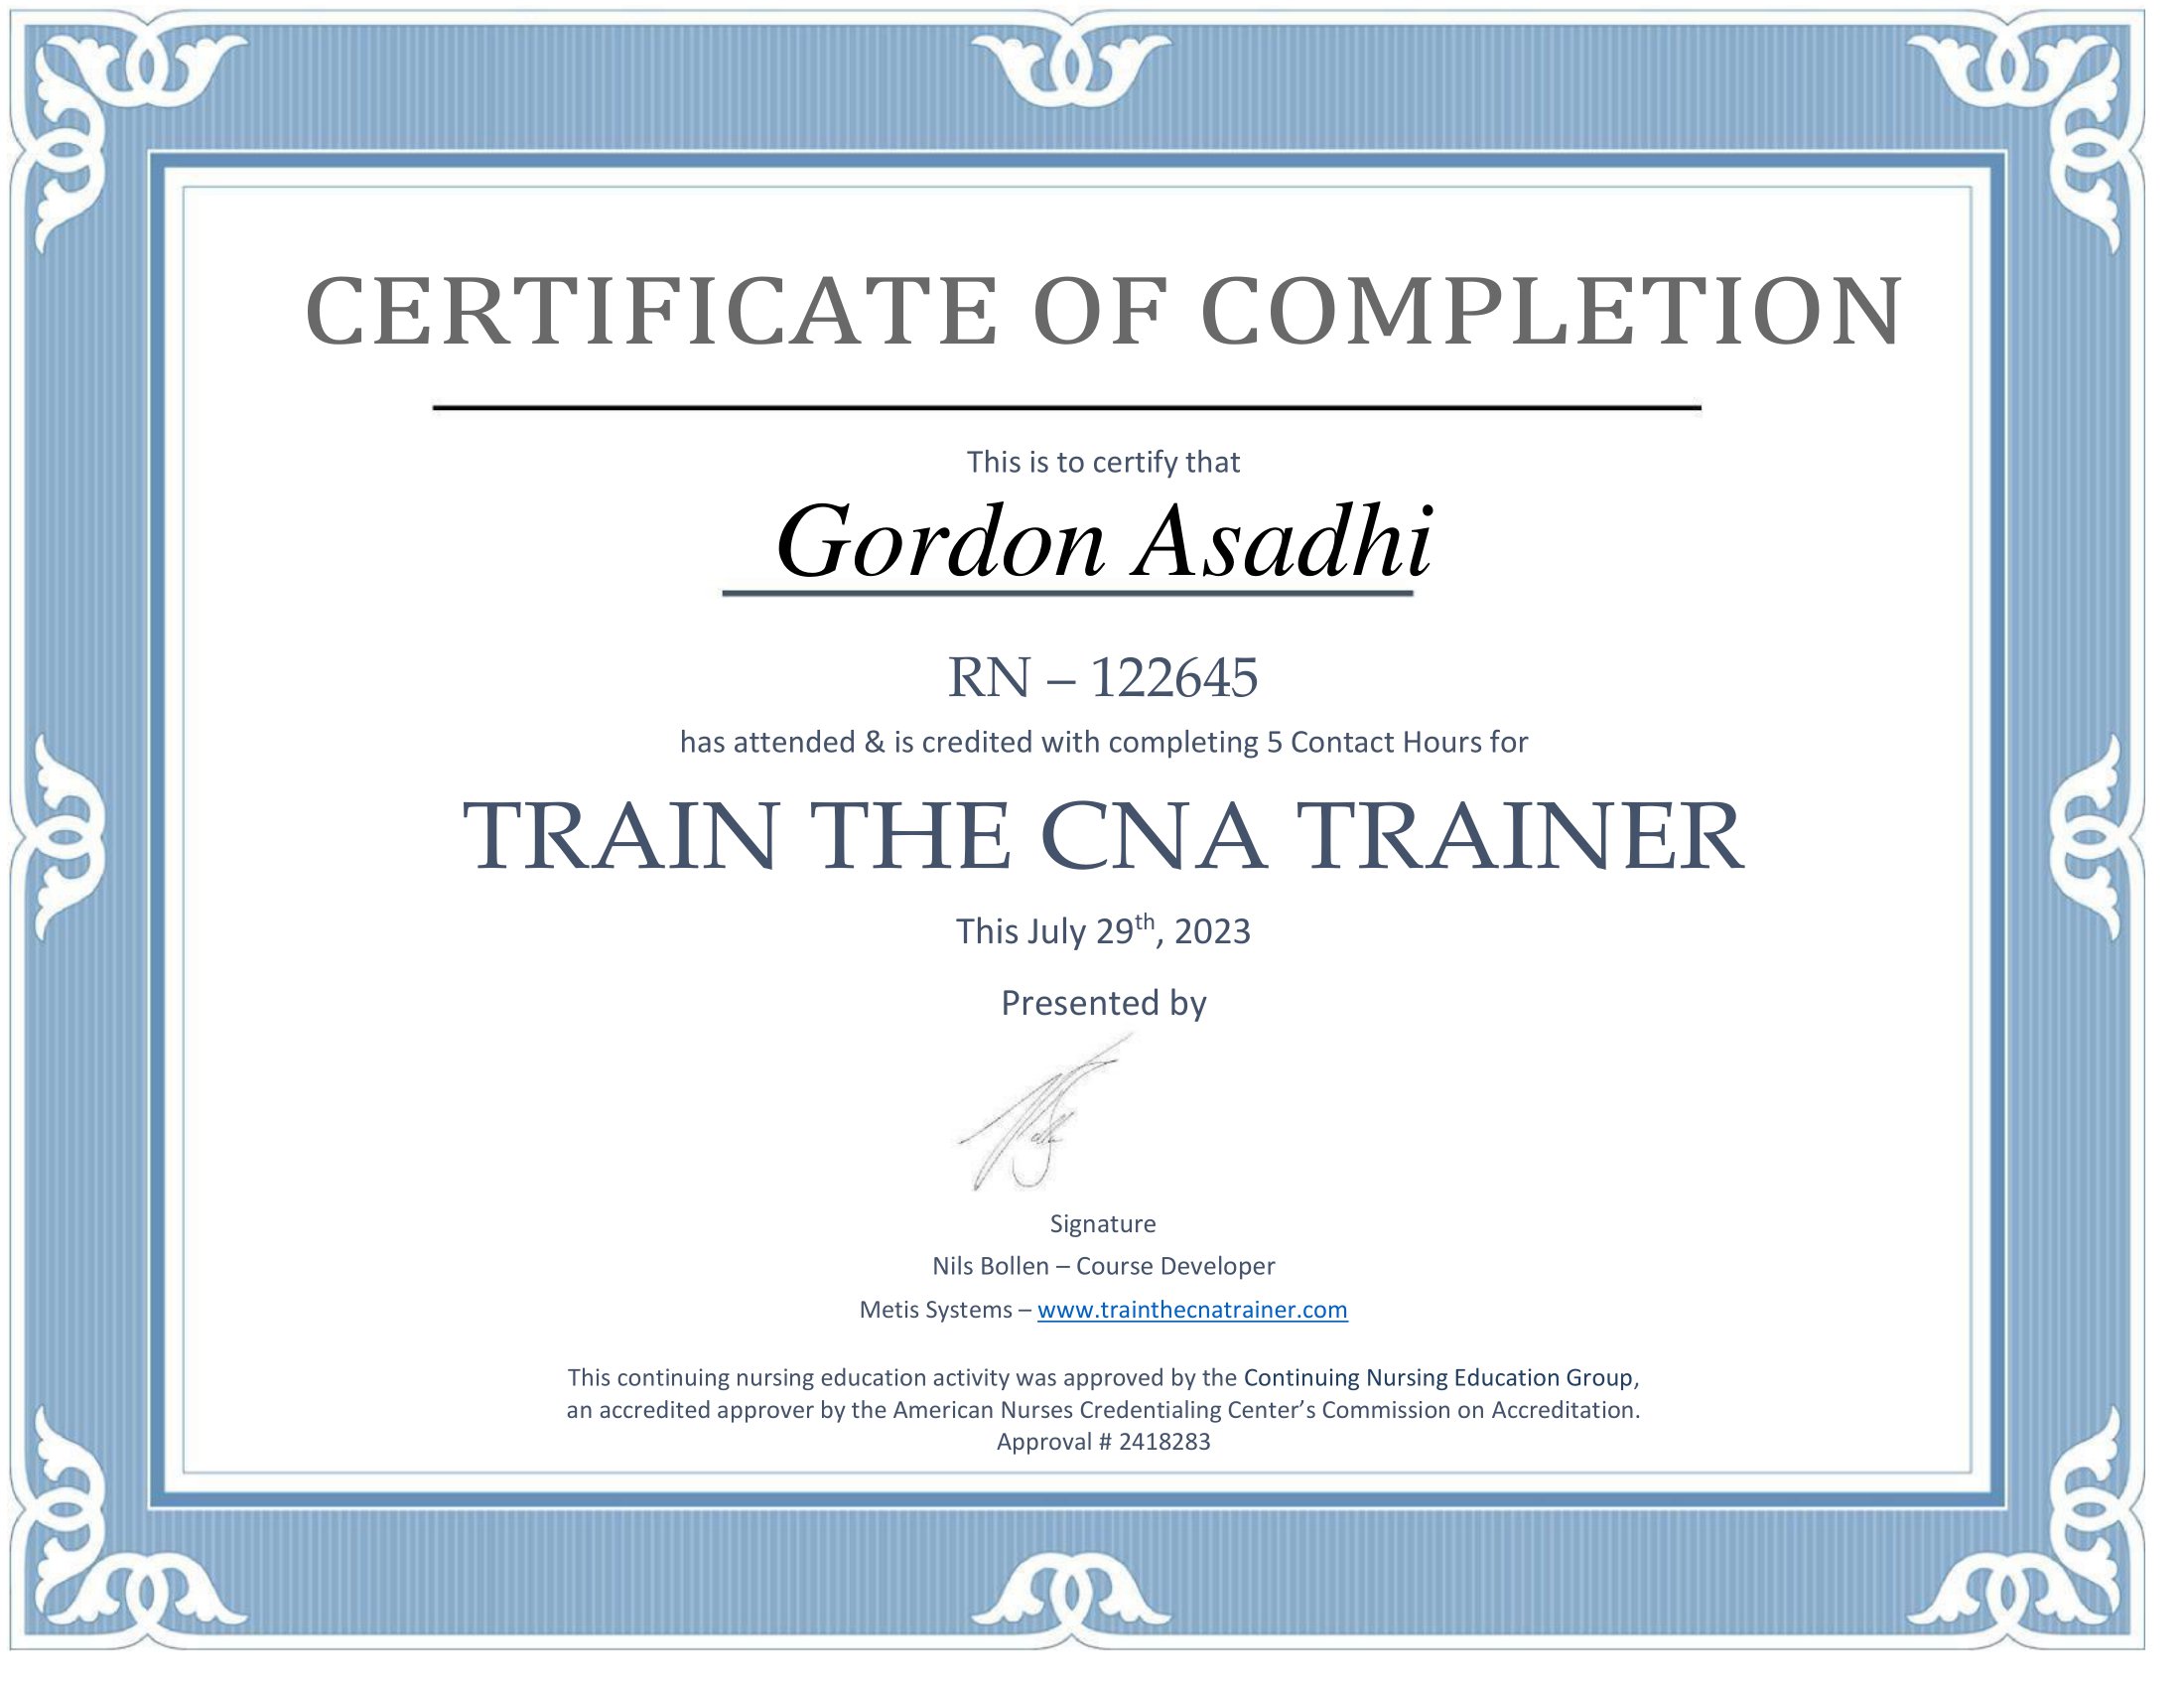 Certificate_of_Completion